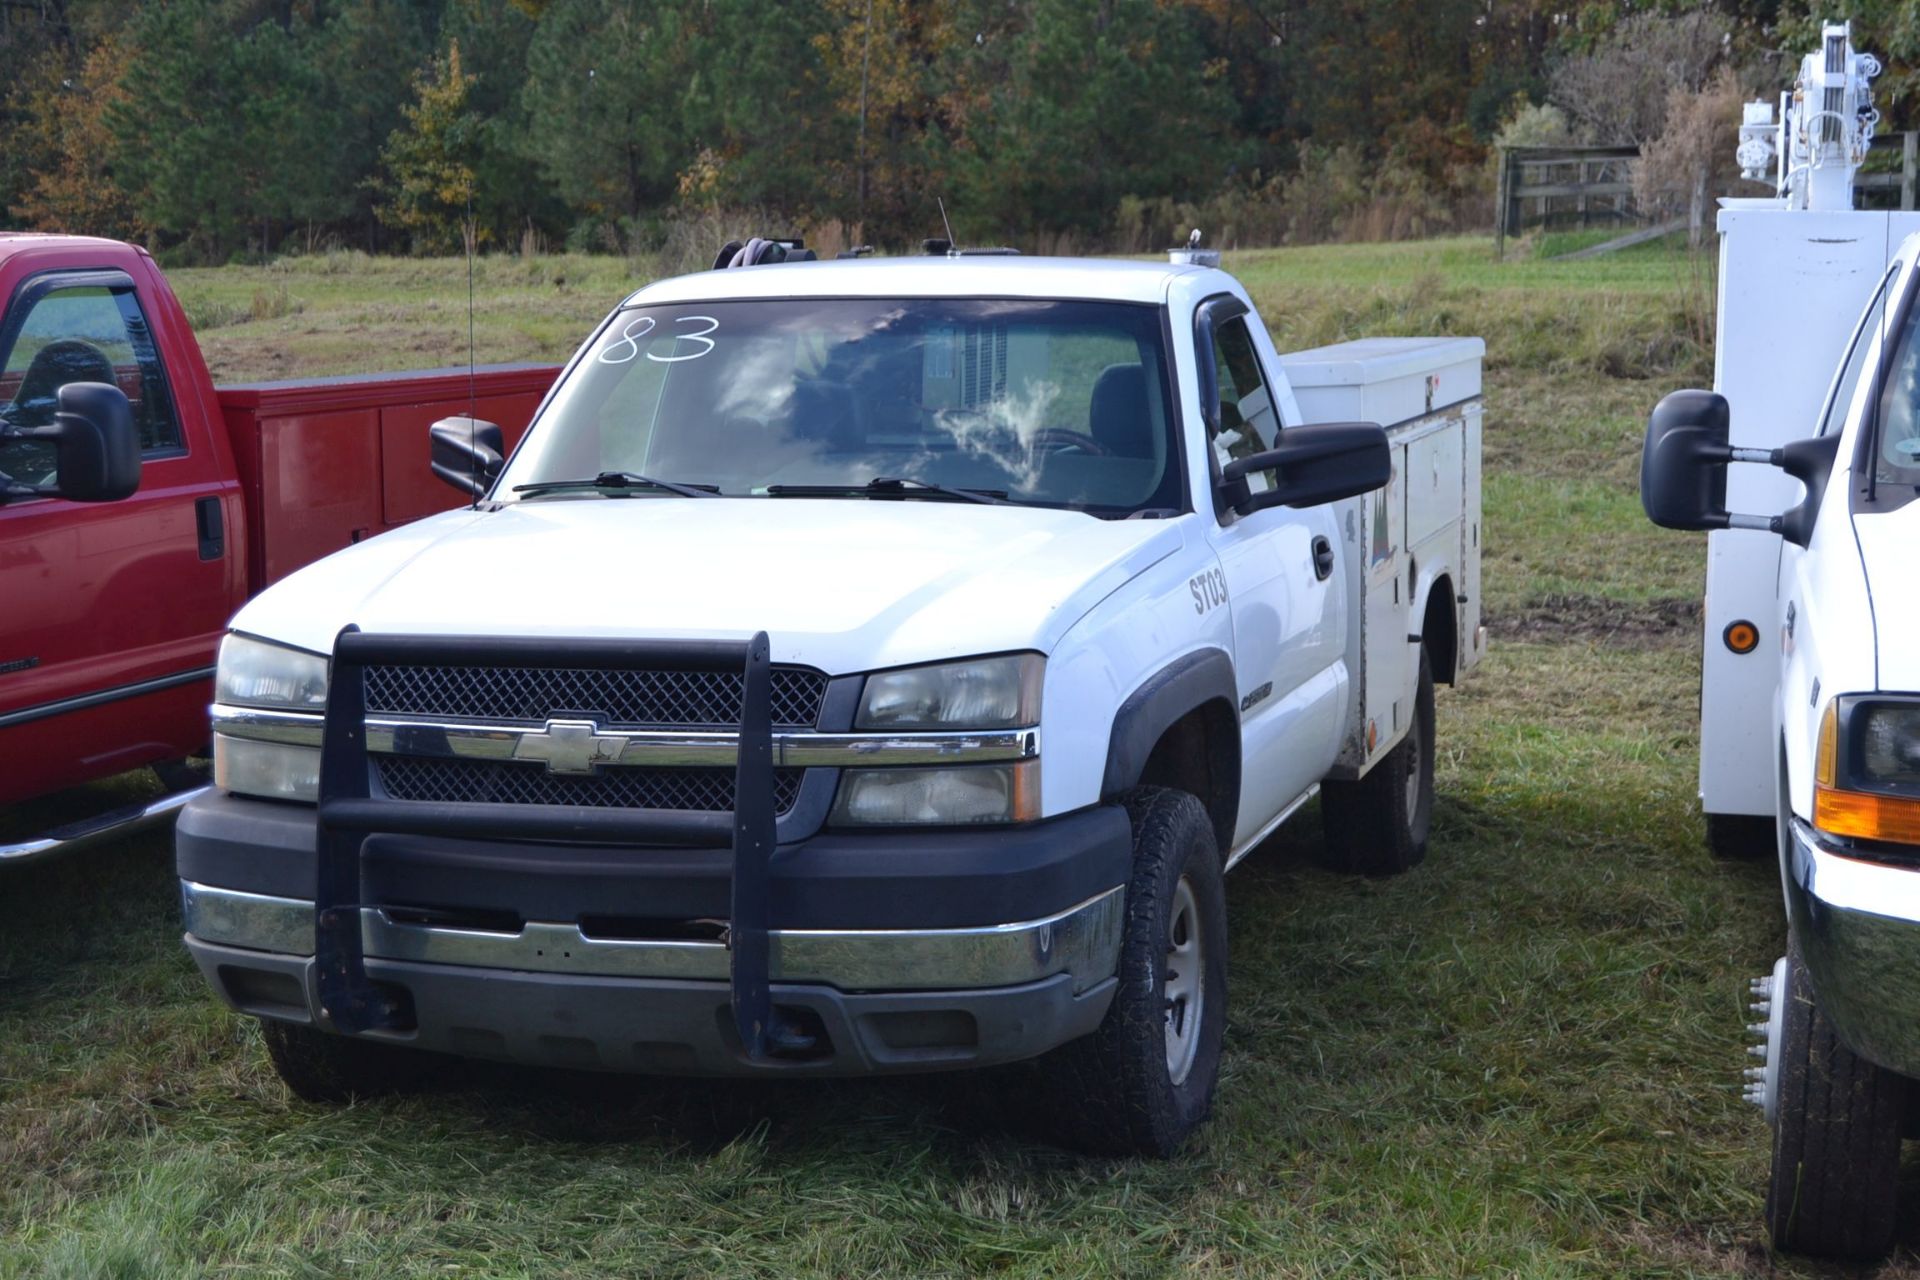 2003 CHEVY 4X4 SINGLE CAB MODEL 2500 W/ AUTO TRANS W/ EXTRA TOP BOXES W/ T30 AIR COMPRESSOR 162,